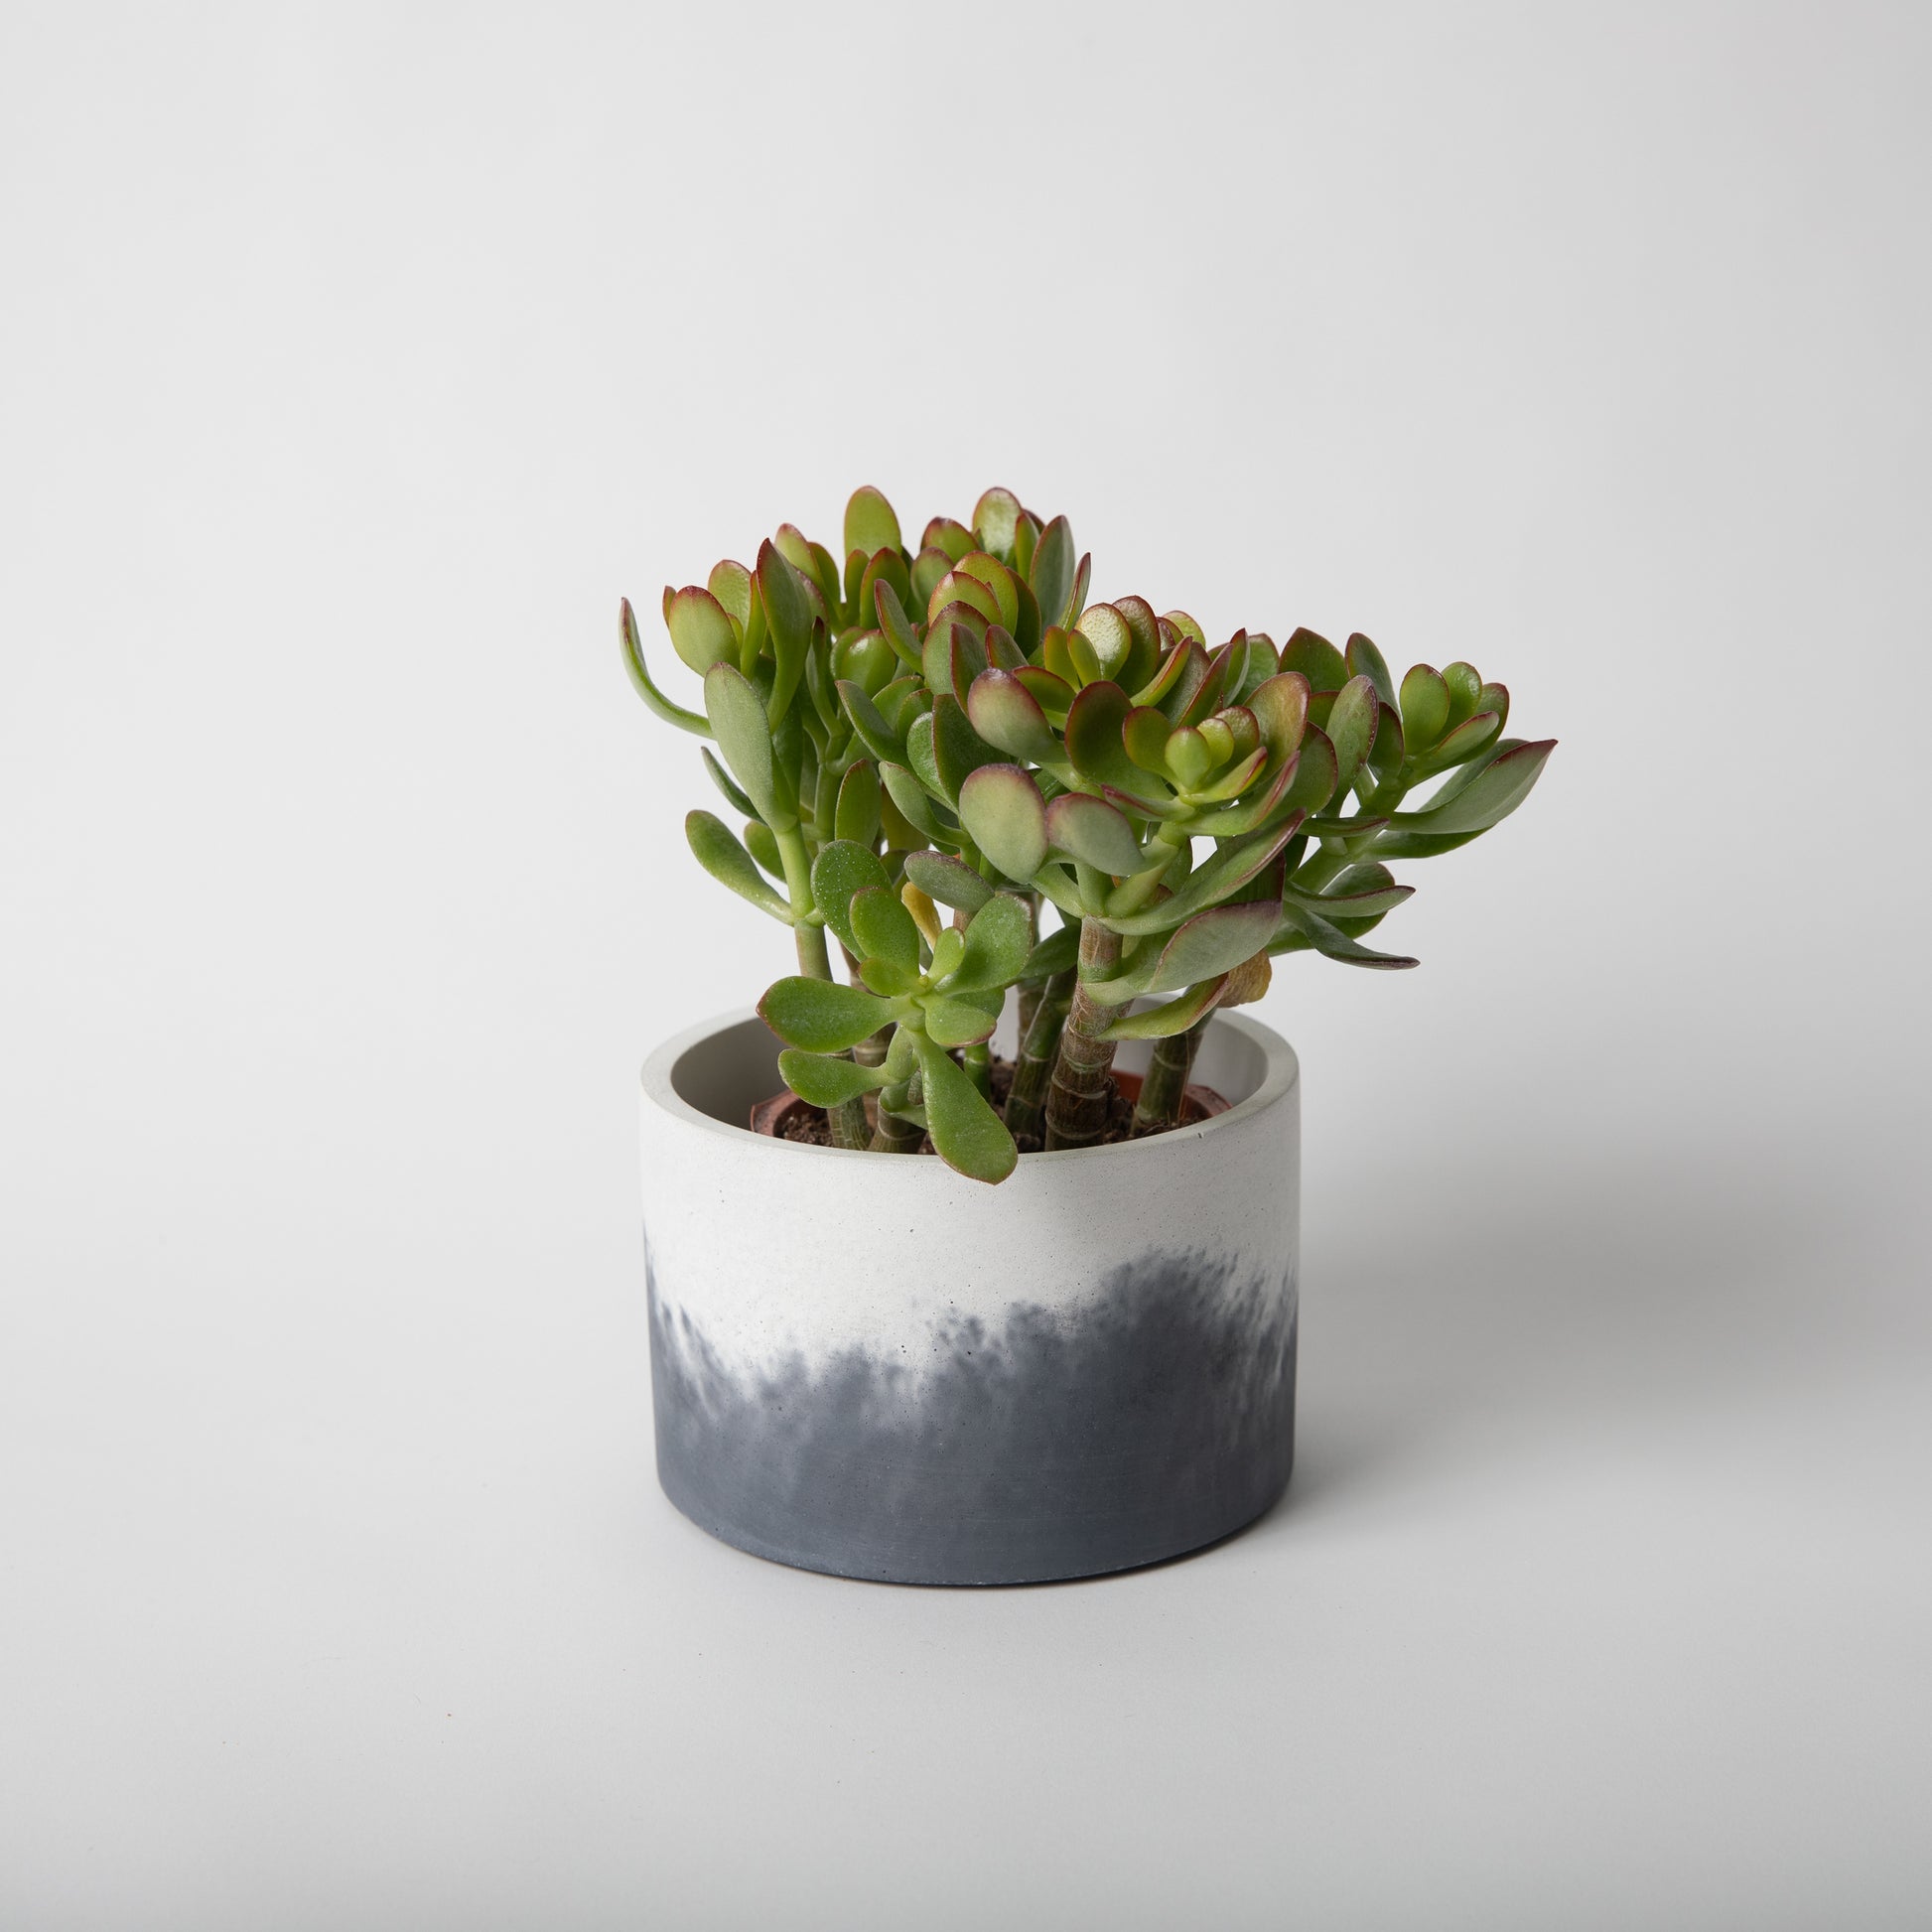 5 inch concrete vessel in black and white with plant in it.